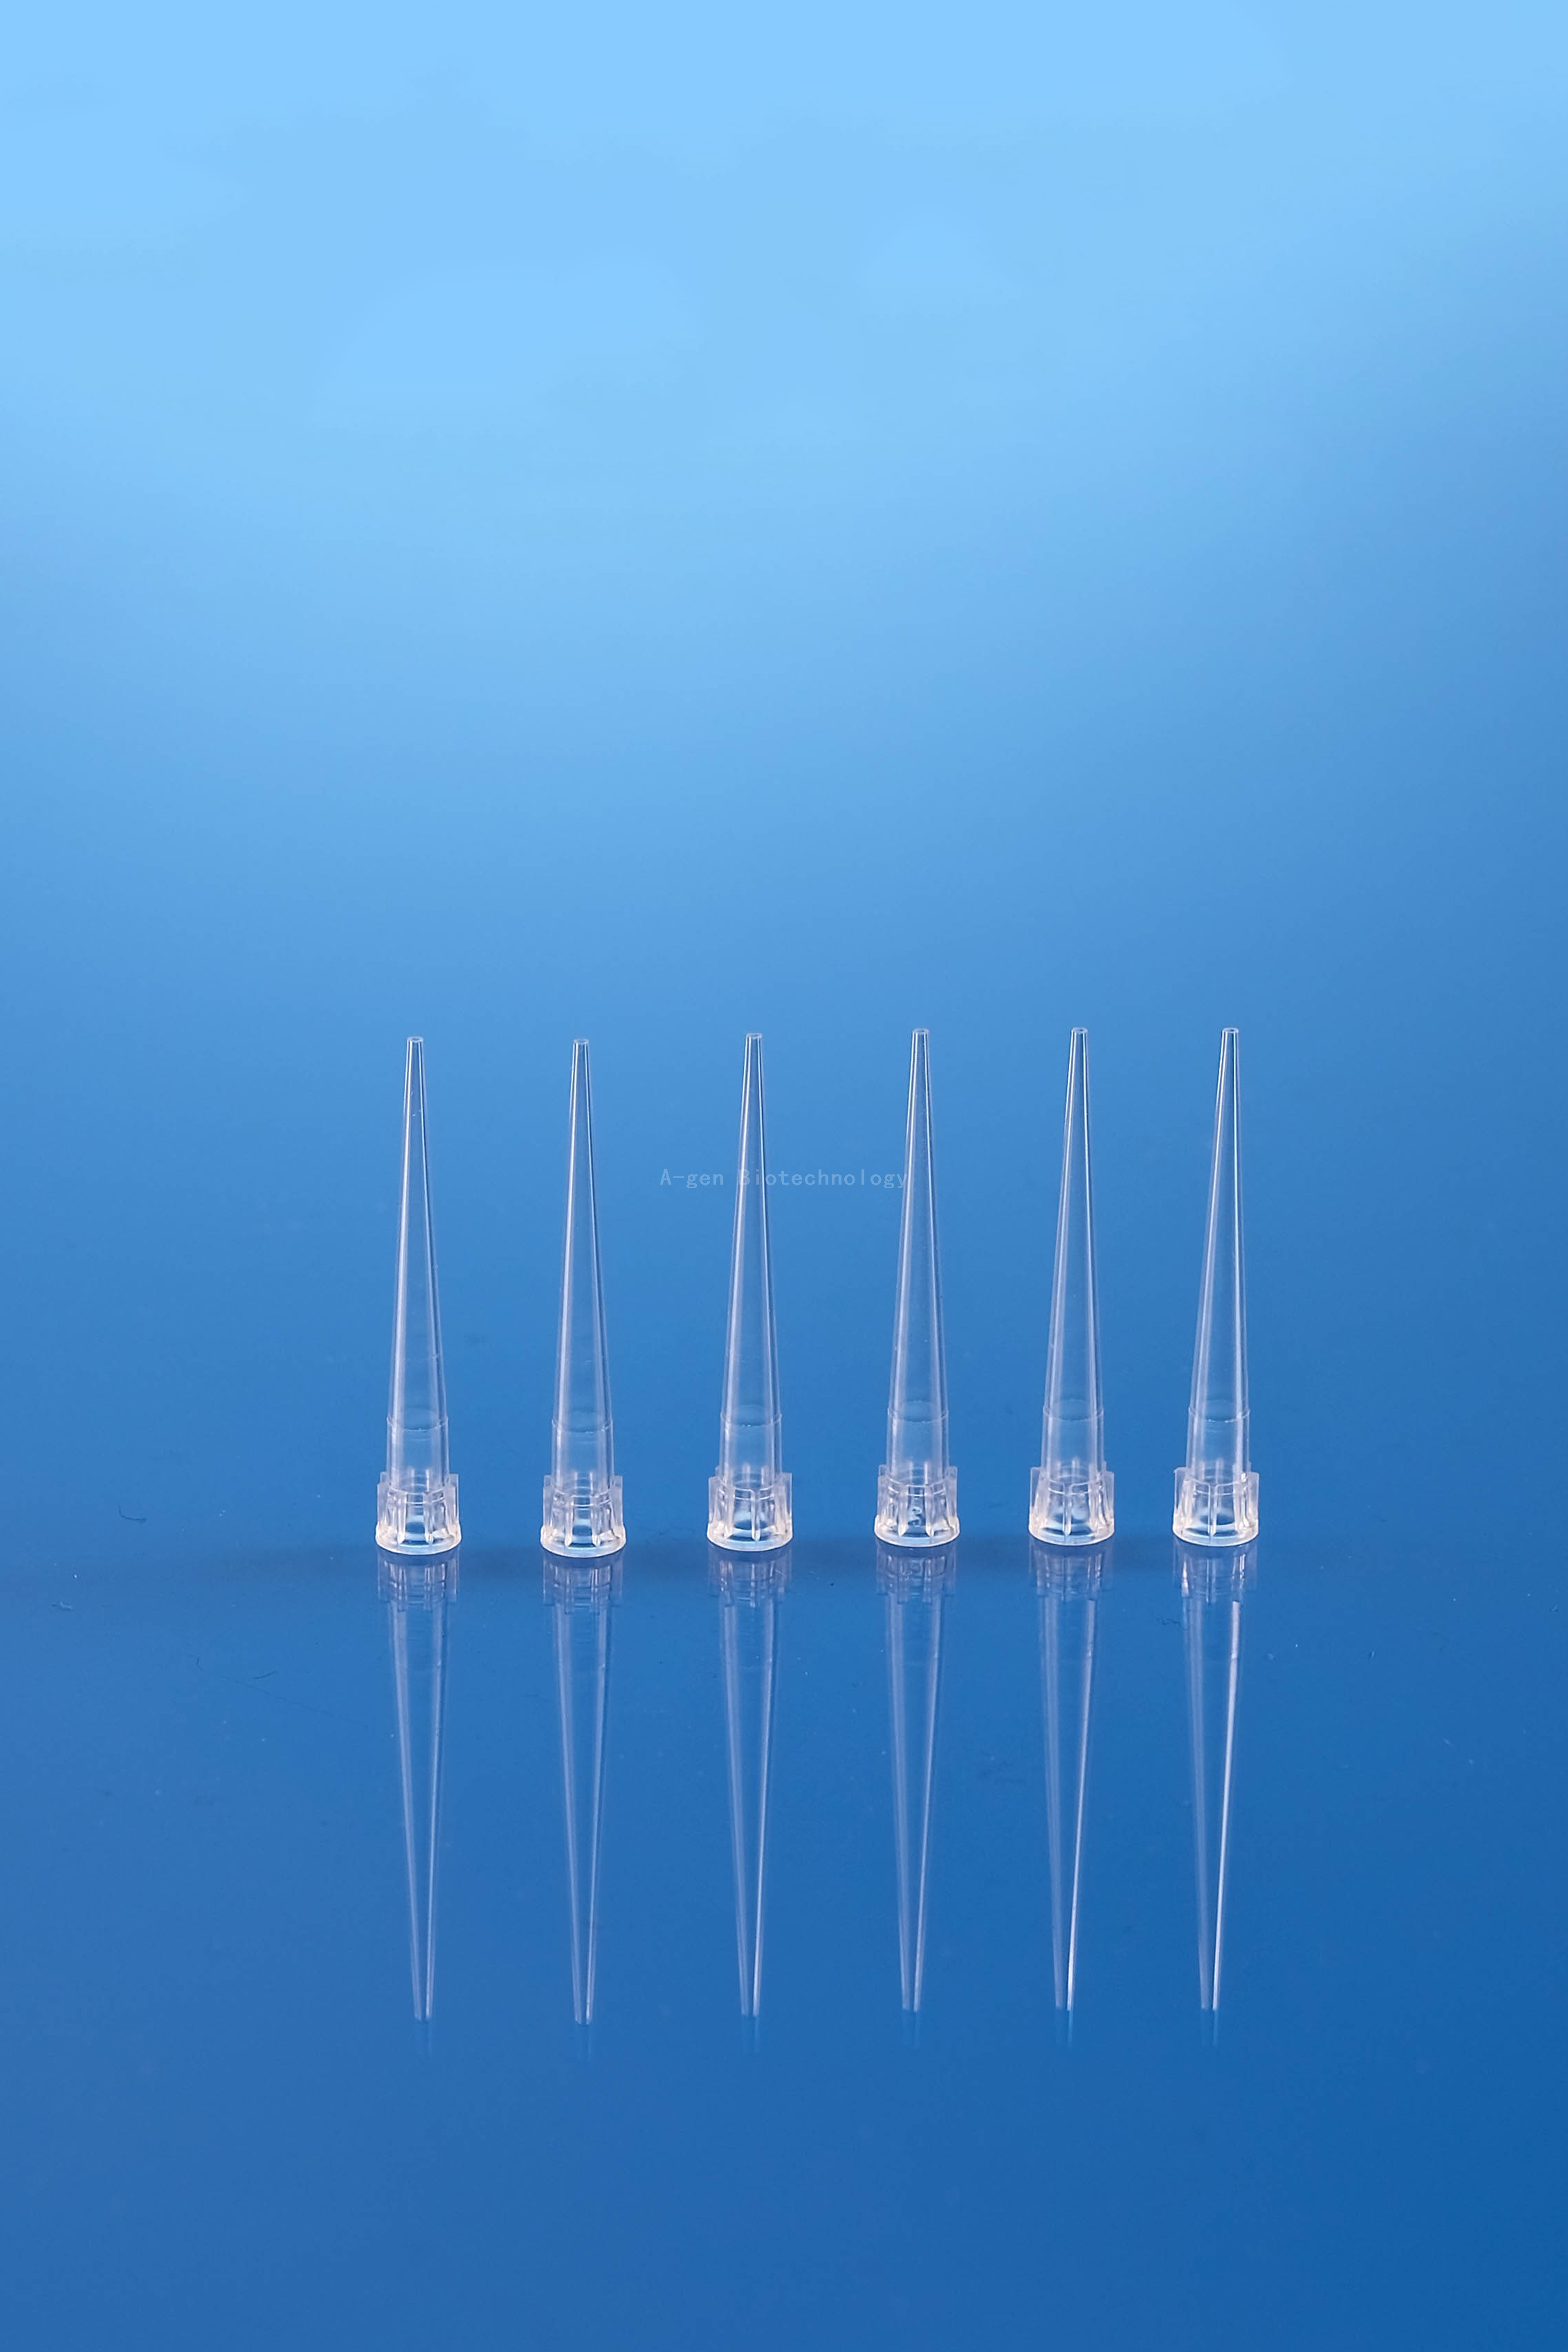 Agilent 70μL Transparent Pipette Tip (Racked,sterilized) for Liquid Transfer VTF-384-70-RSL Low Residual with Filter